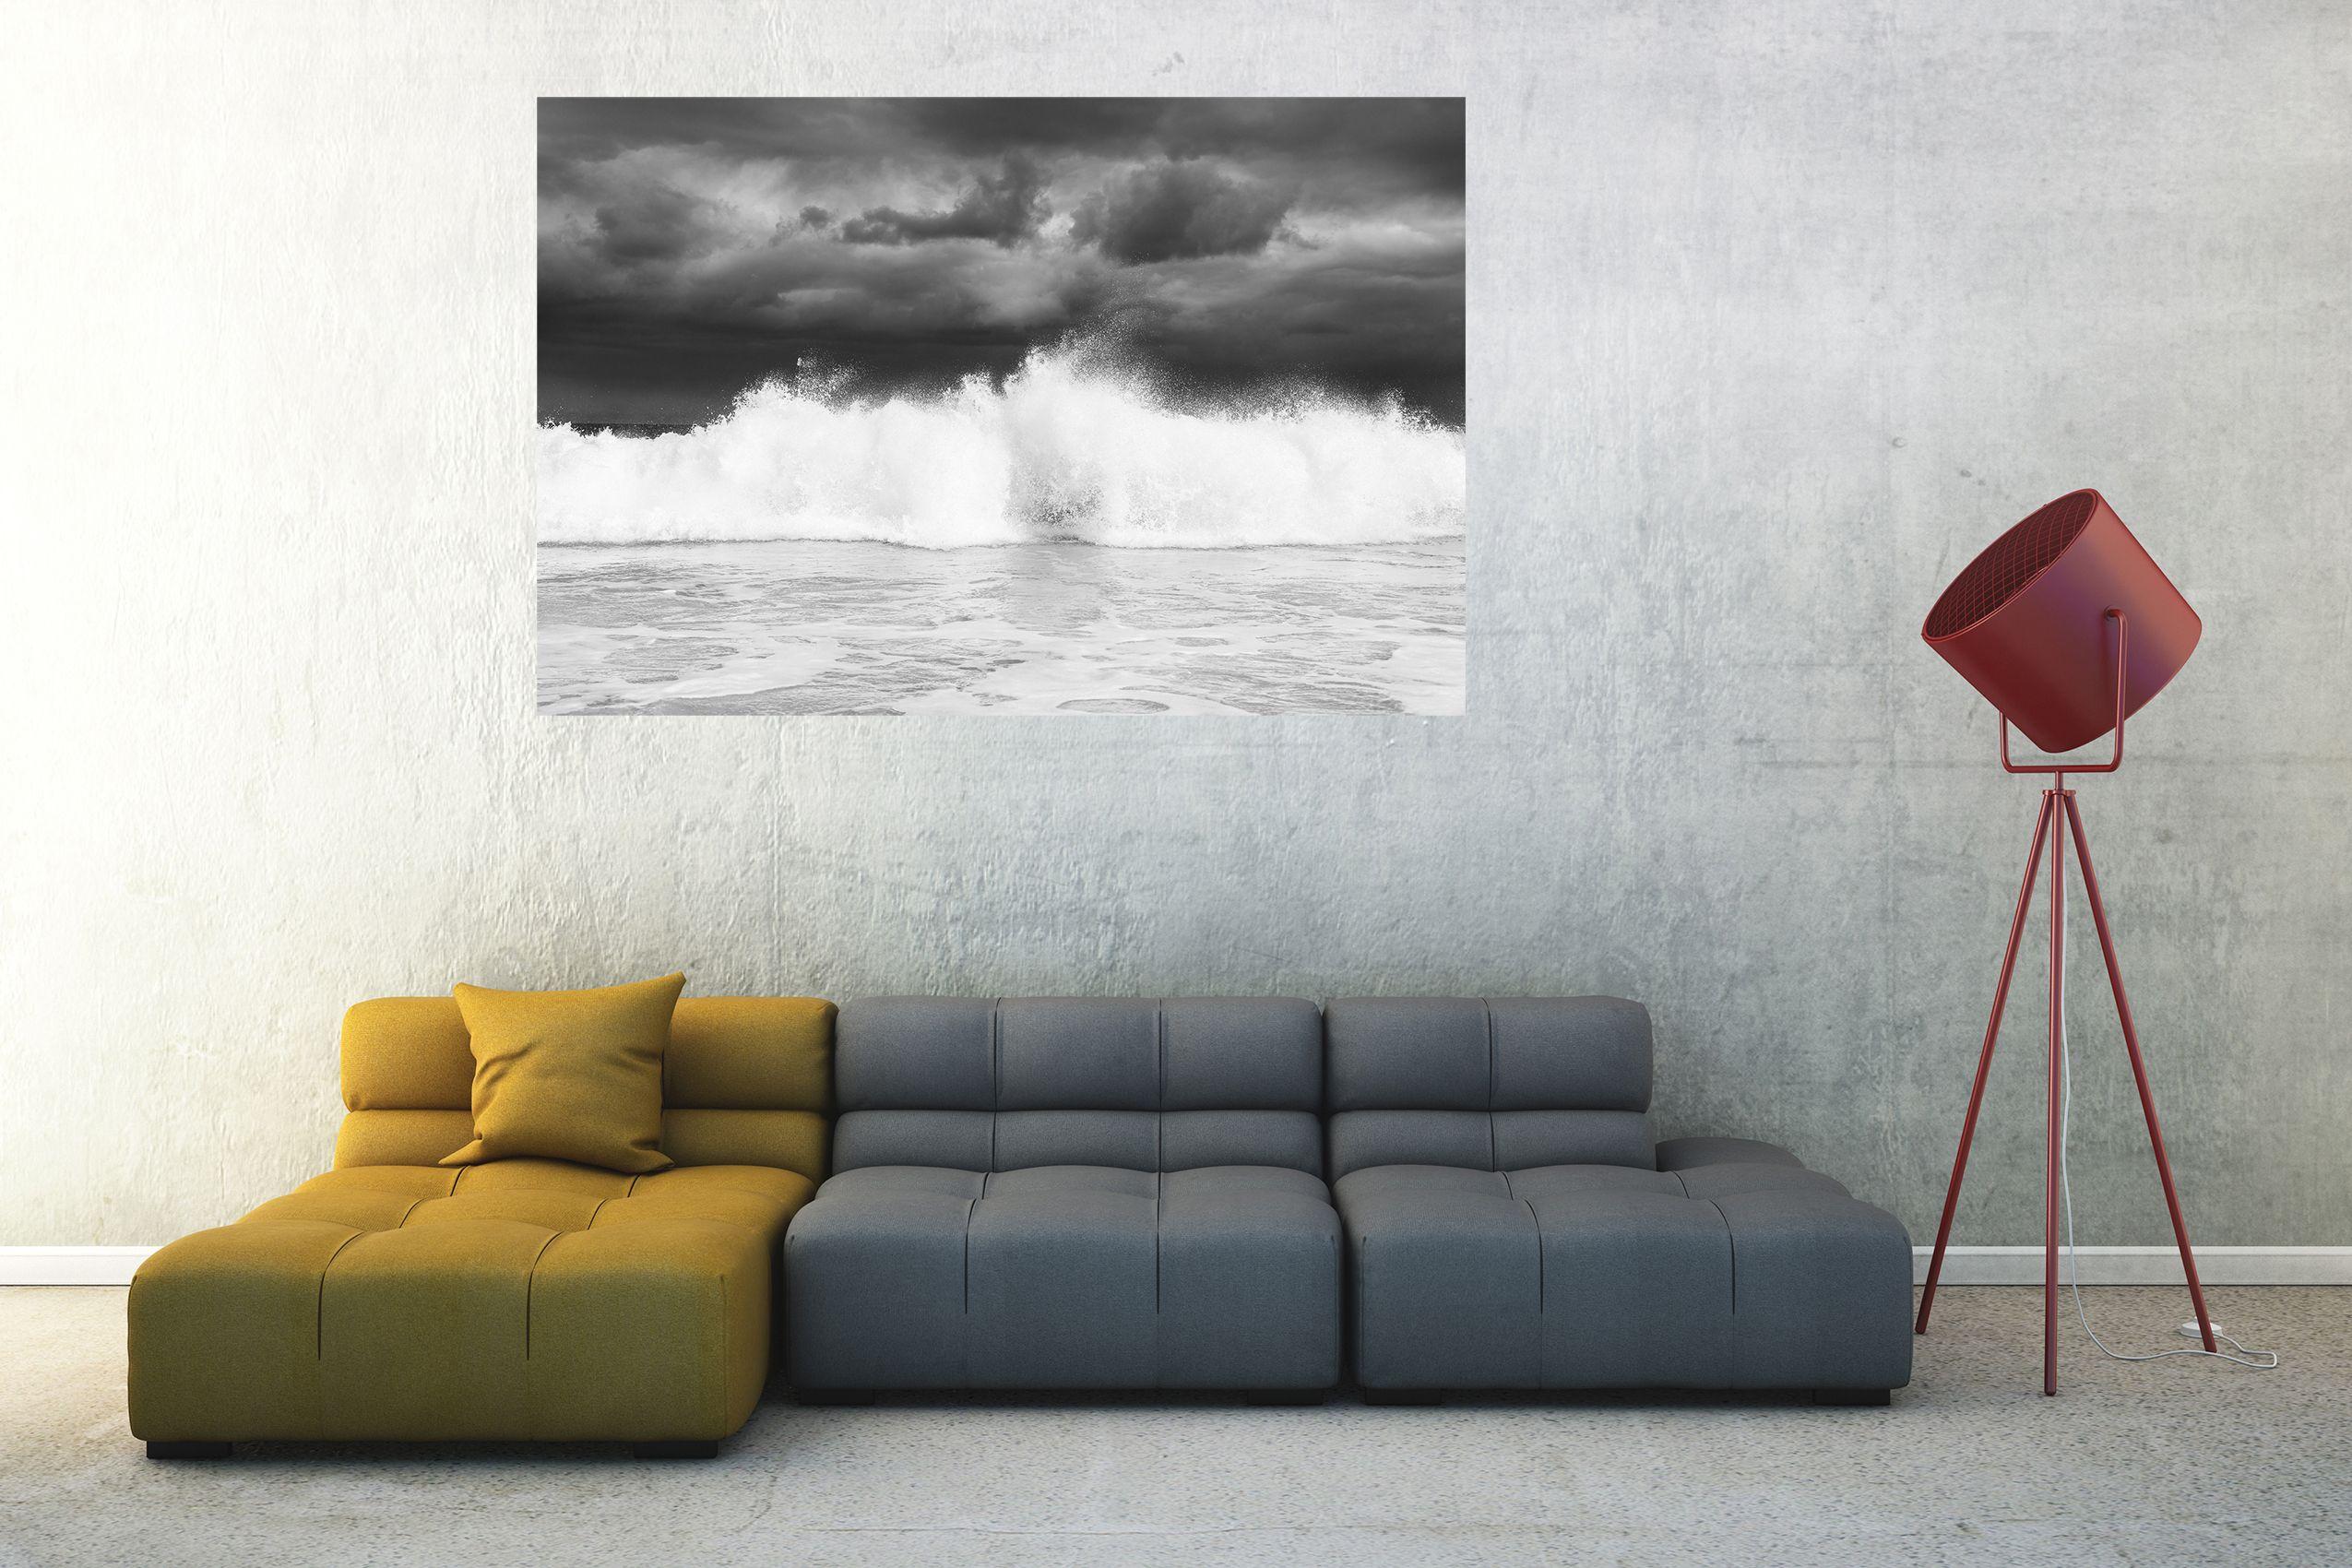 The storm was clearing over the sea leaving a dark brooding sky and the fresh sunlight hit the crashing wave. Andrew has created a wonderfully dramatic black and white print here which would look ideal in any beach house or even an escape in a city